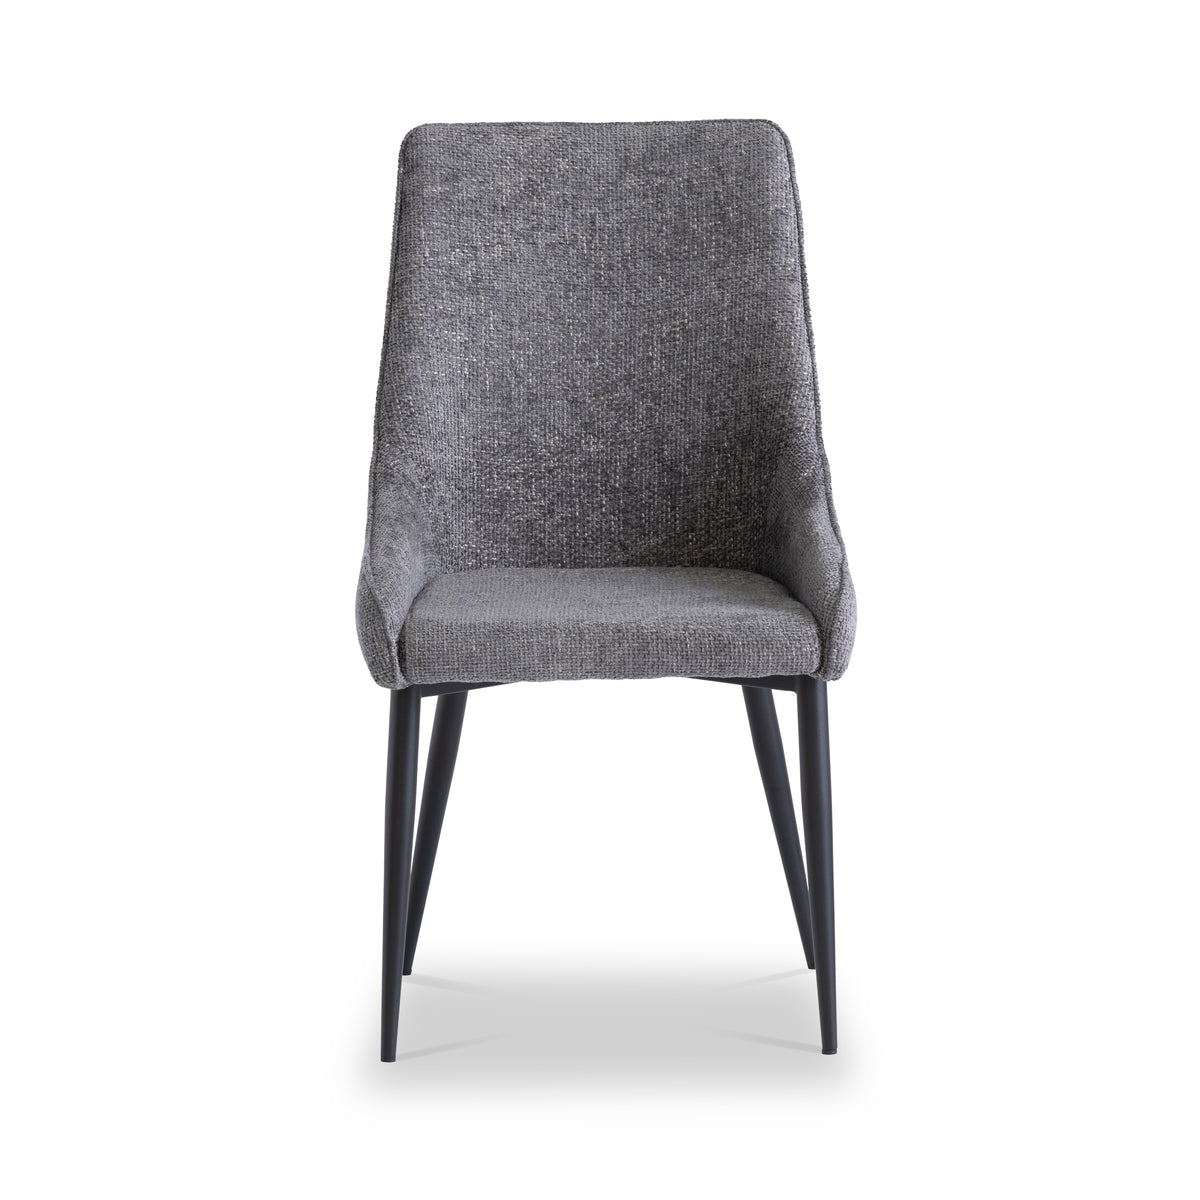 Perth Graphite Dining Chair by Roseland Furniture